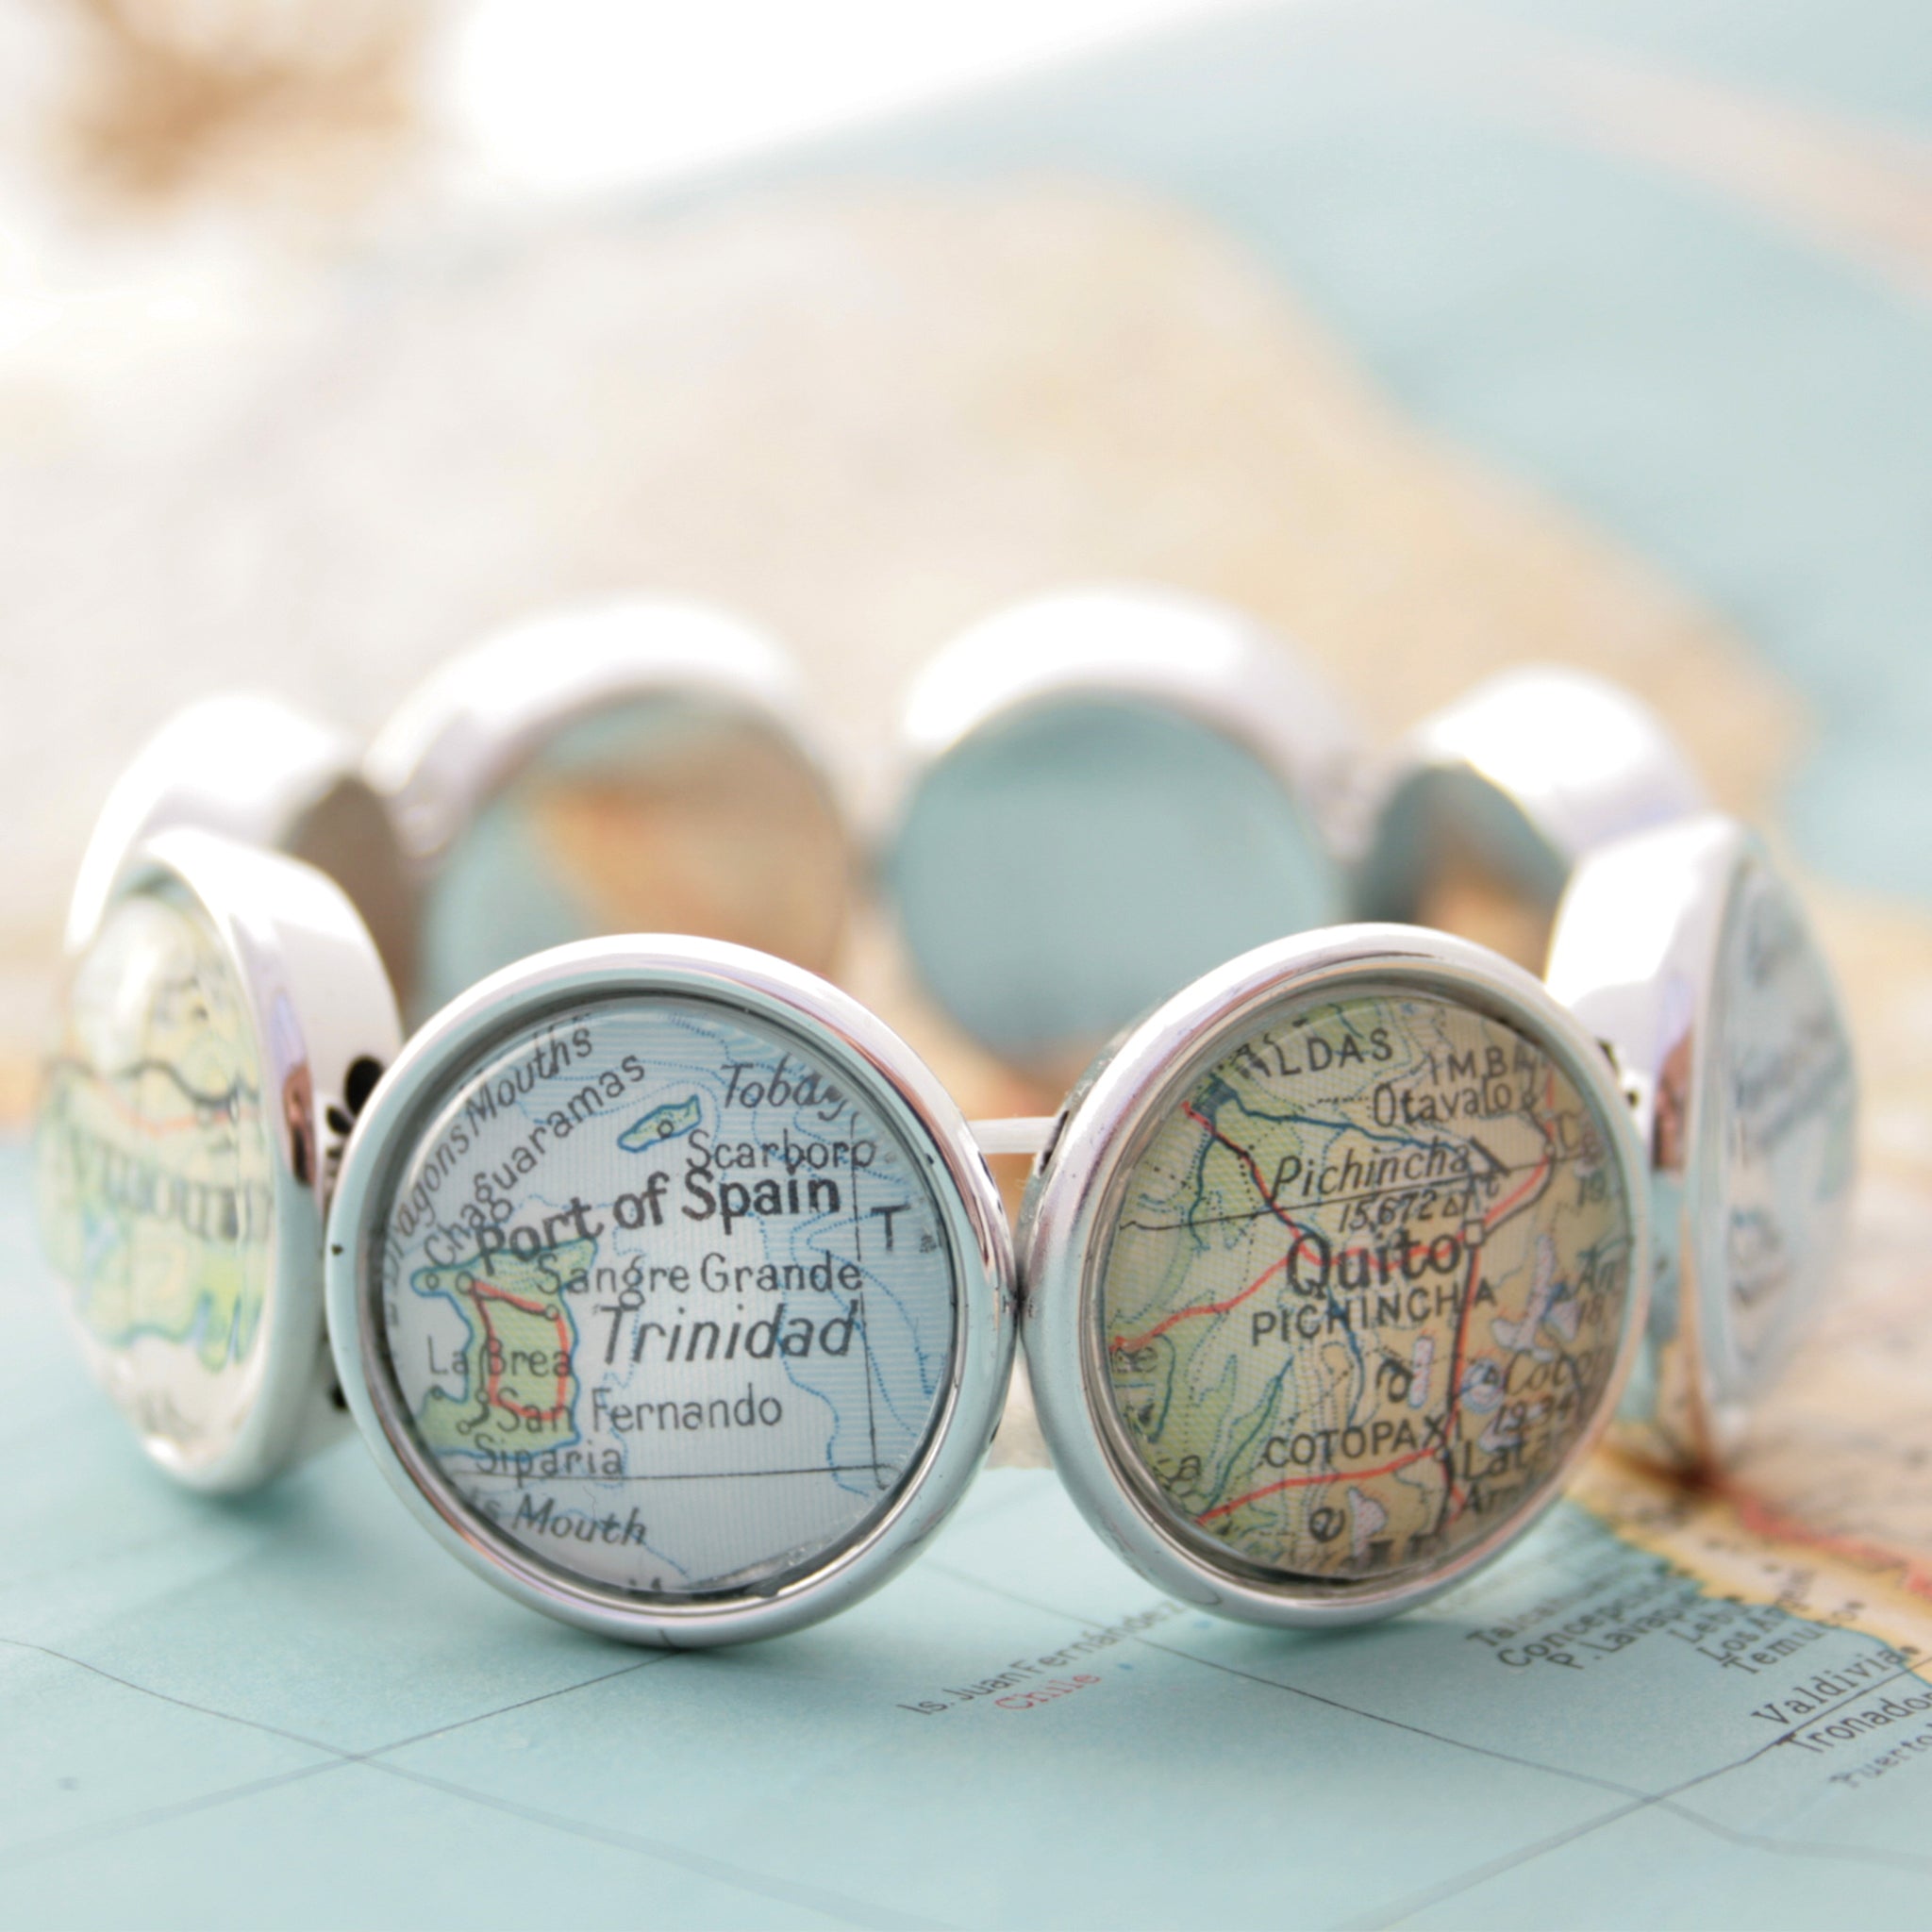 Stretchy bracelet in silver tone featuring custom map locations